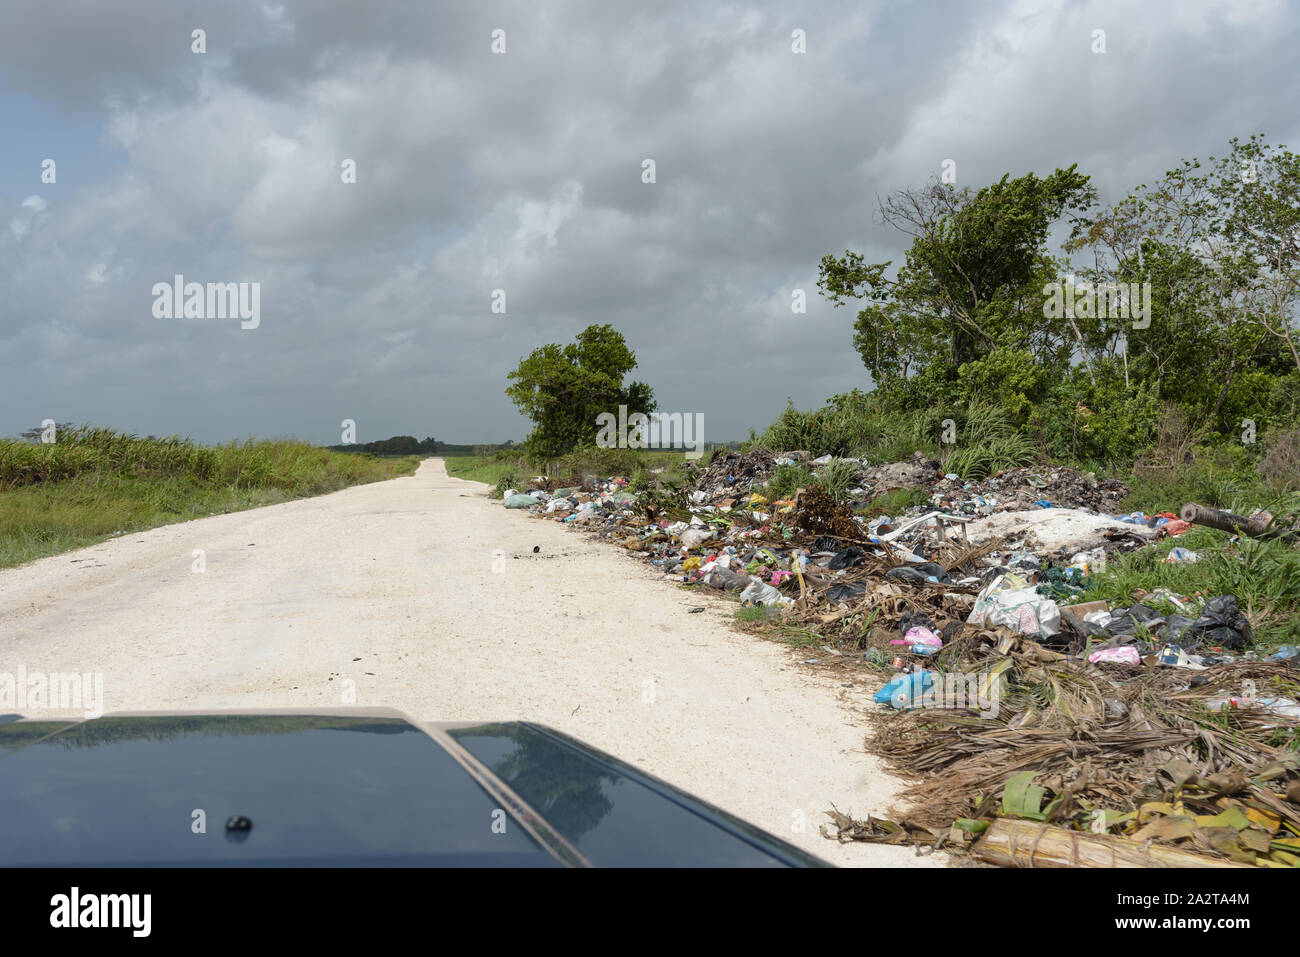 Orange Walk, Belize - May 21, 2017: Trash dumped next to road - highlights the issue of roadside garbage disposal in Latin America. View through winds Stock Photo